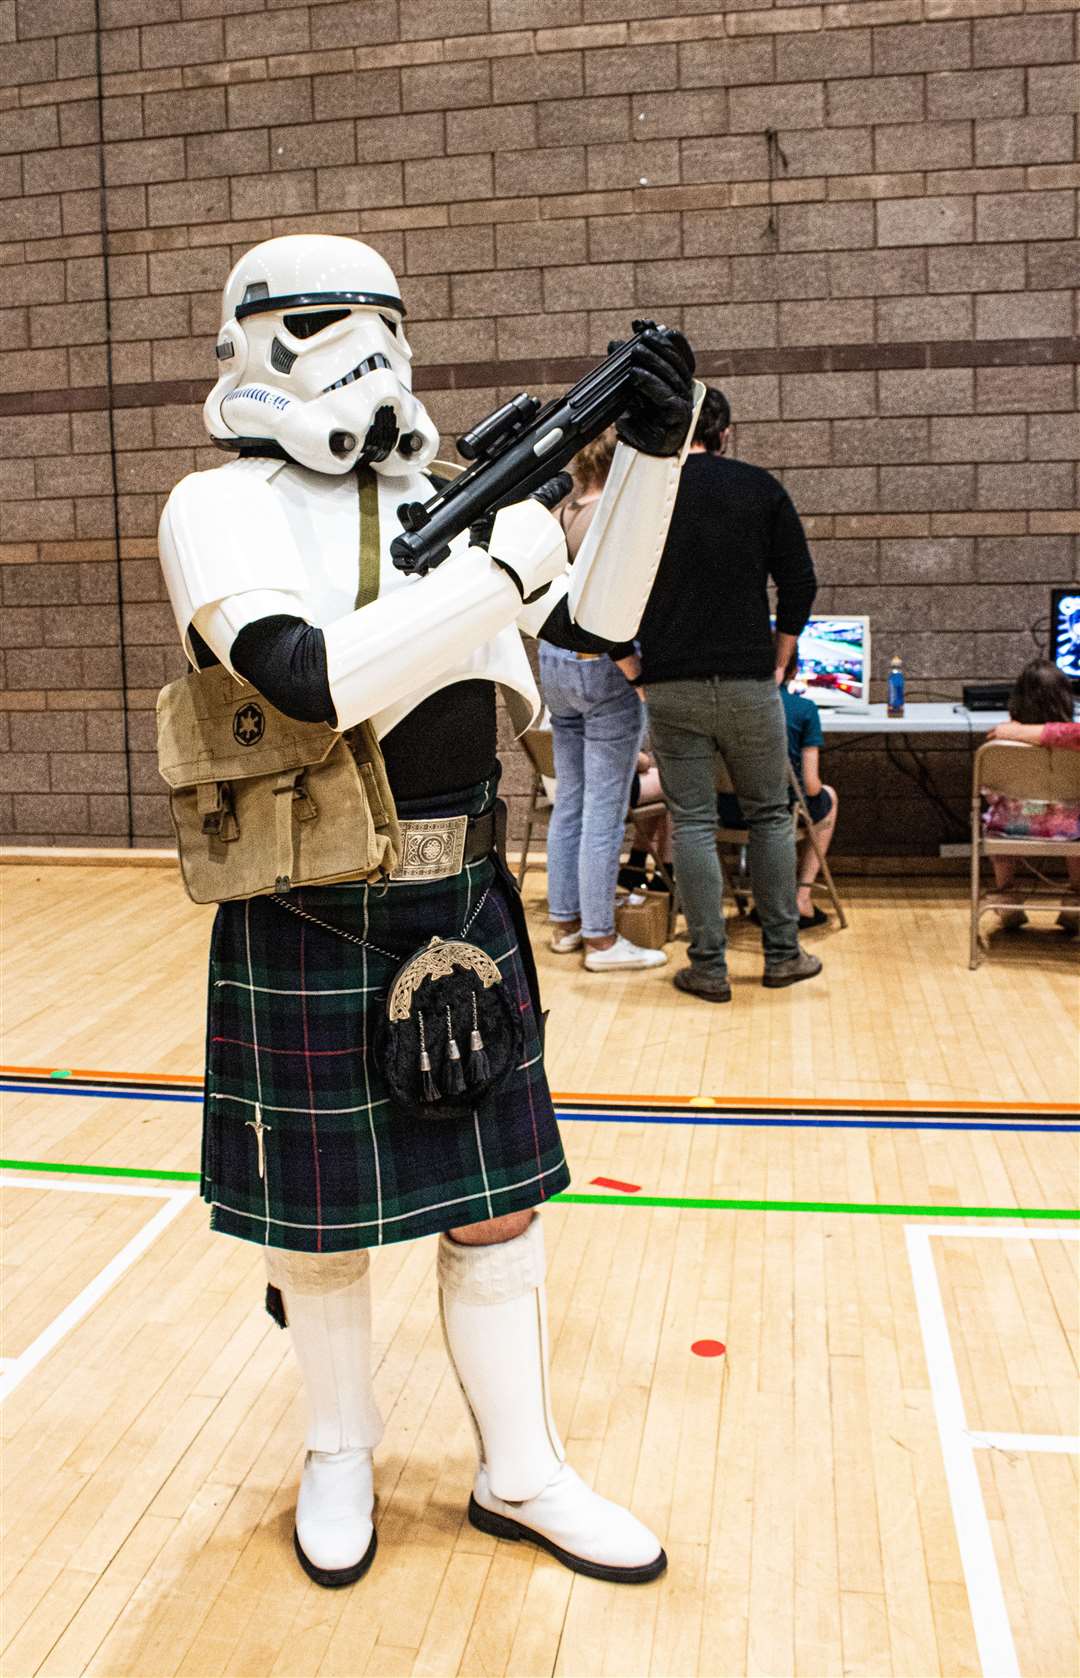 Stormtrooper Bryan from Aberdeen took a day off from manning the Death Star to come to ComiCon. Photo: Niall Harkiss